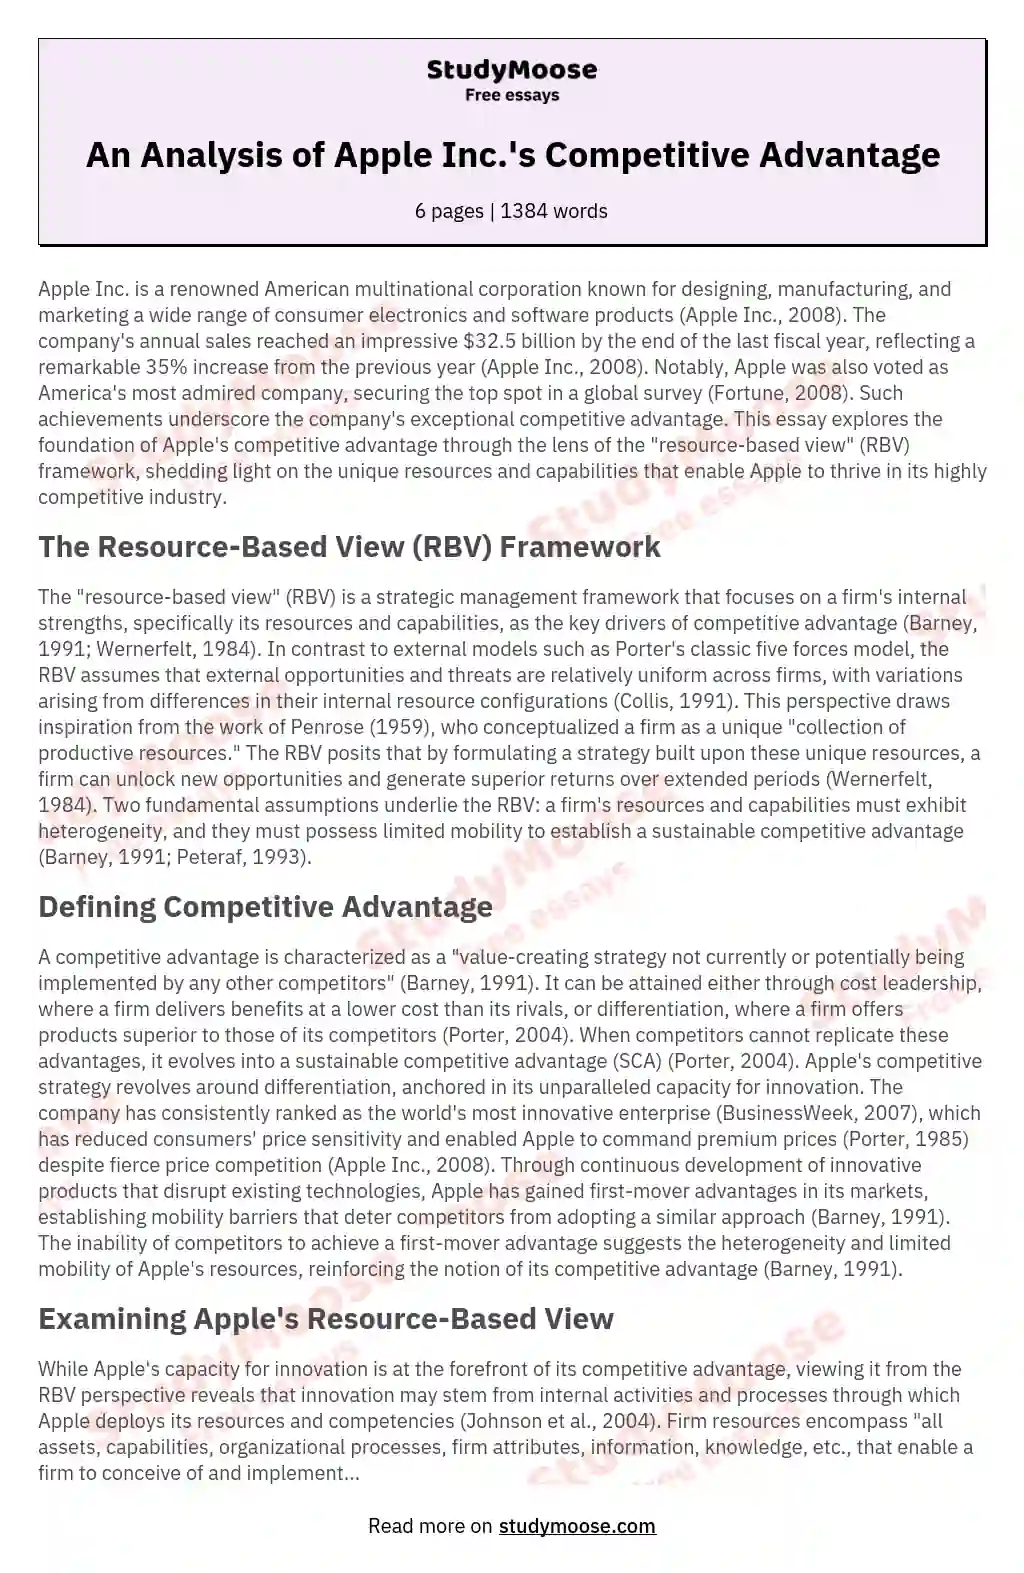 An Analysis of Apple Inc.'s Competitive Advantage essay